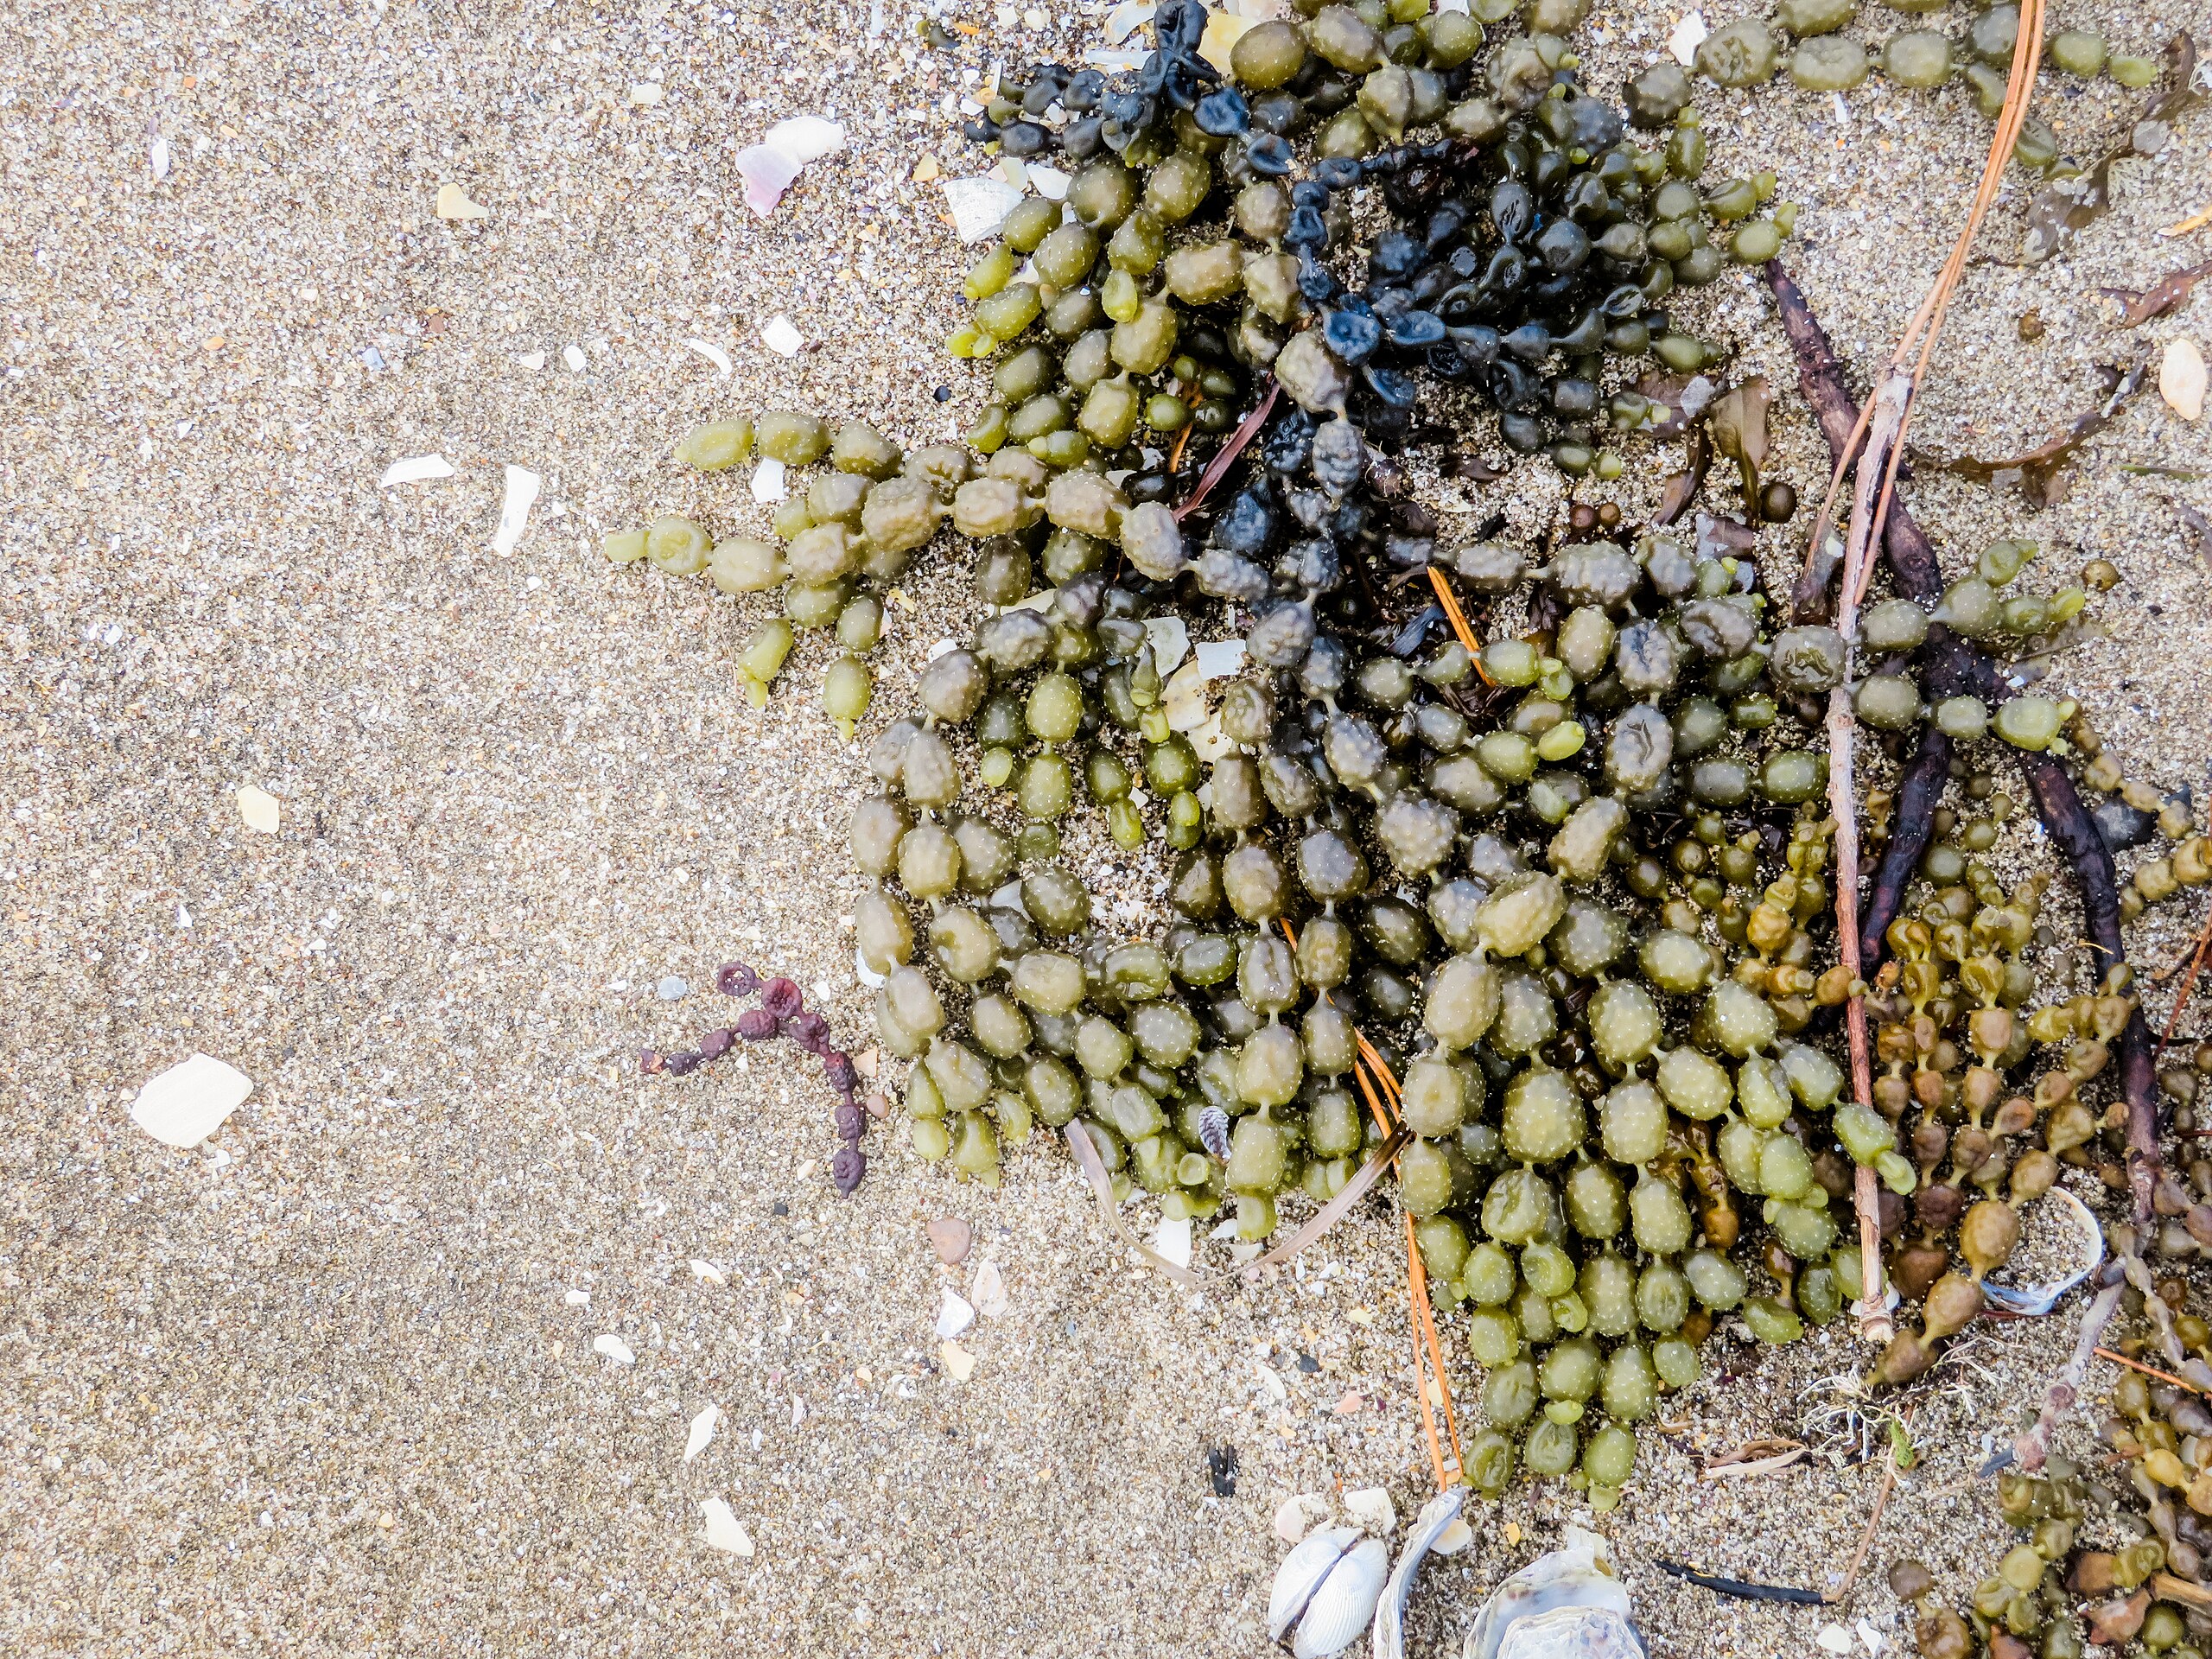 New research suggests seaweed species may adapt to higher temperatures